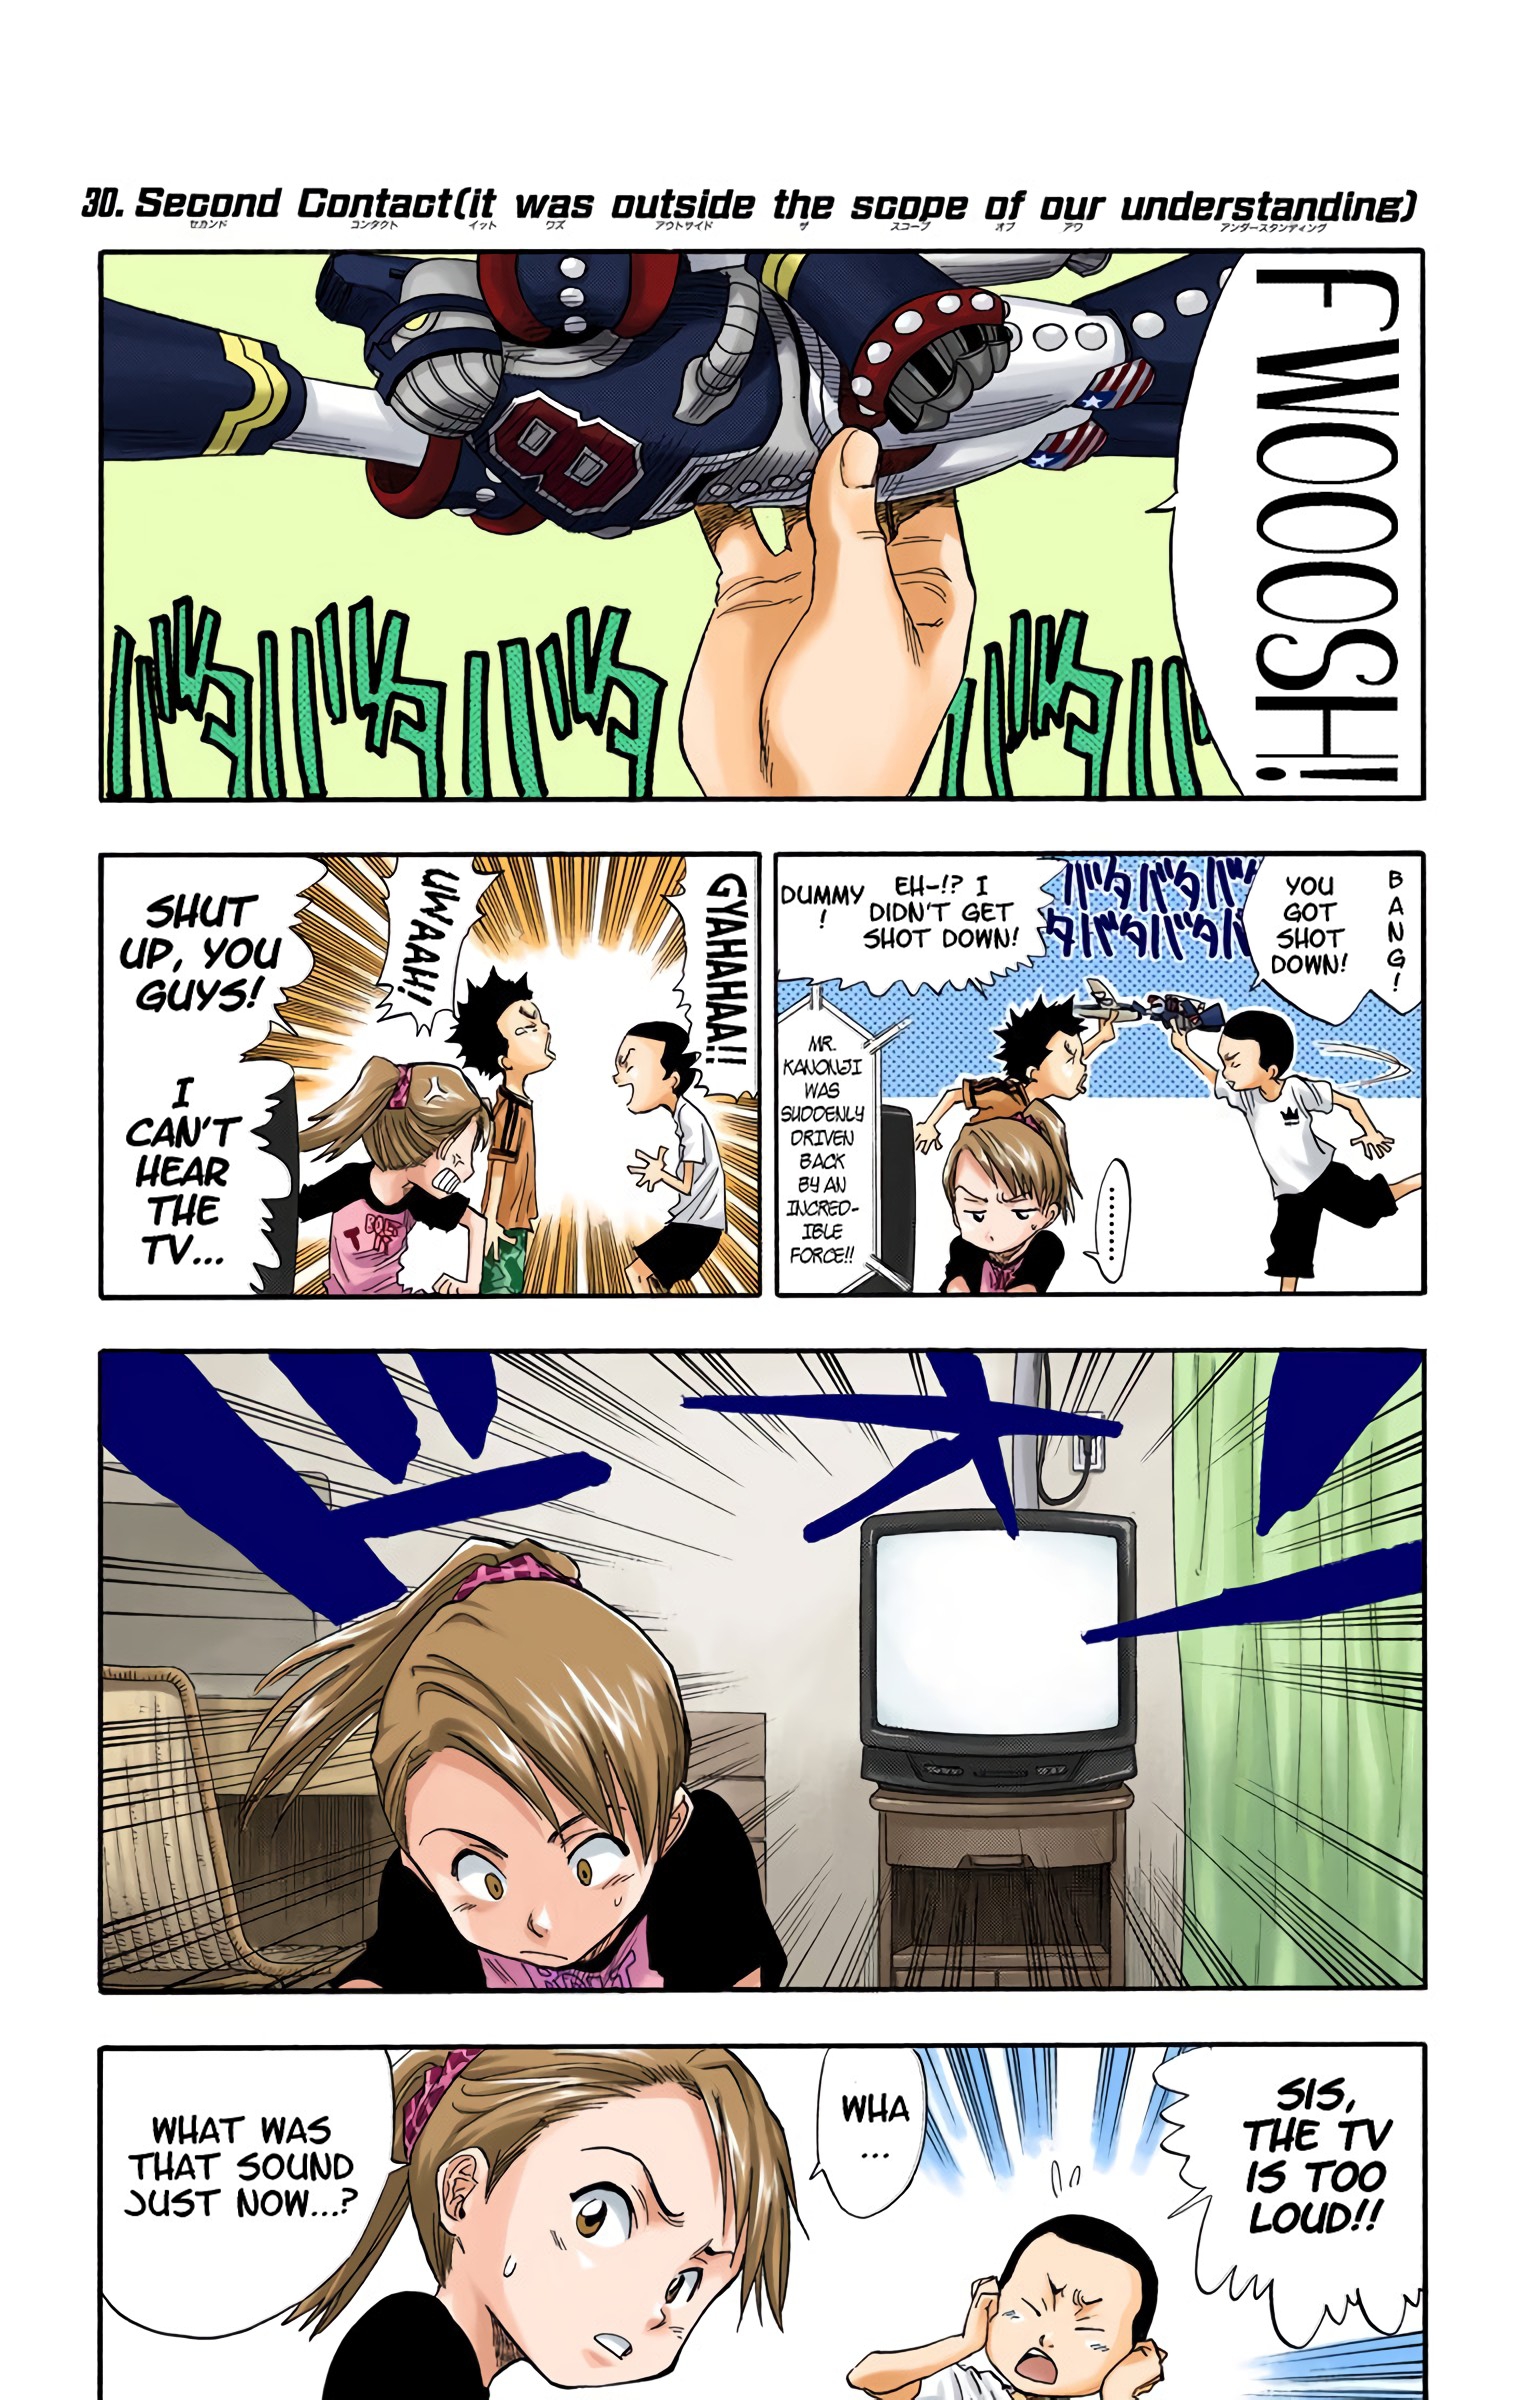 Bleach - Digital Colored Comics Vol.4 Chapter 30: Second Contact (It Was Beyond The Scope Of Our Understanding) - Picture 1